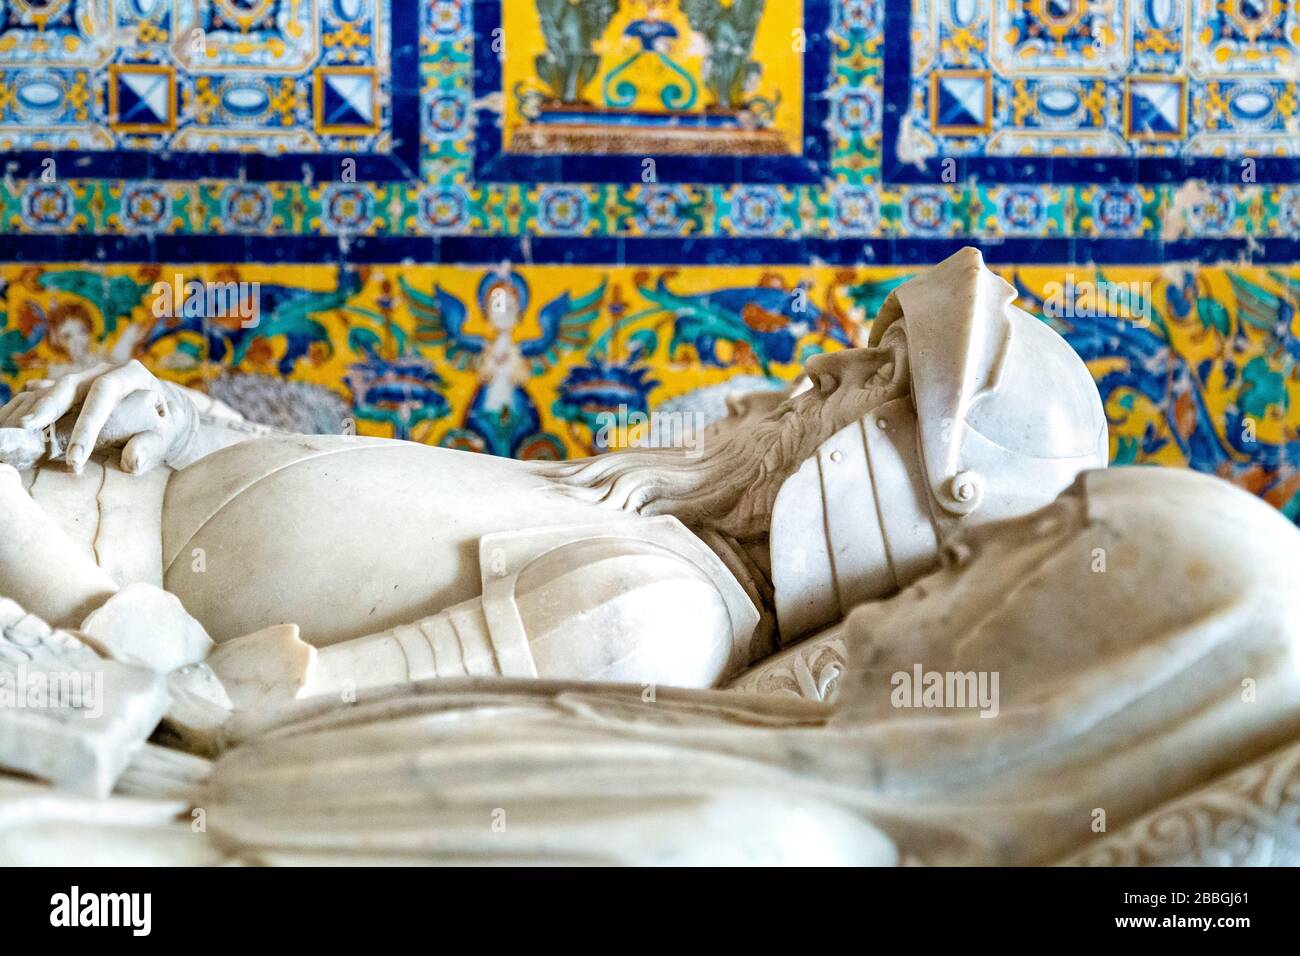 Tomb sculptures in mausoleum of Ribera family, Andalusian Museum of Contemporary Art and former Monastery of Santa Maria de las Cuevas, Seville, Spain Stock Photo